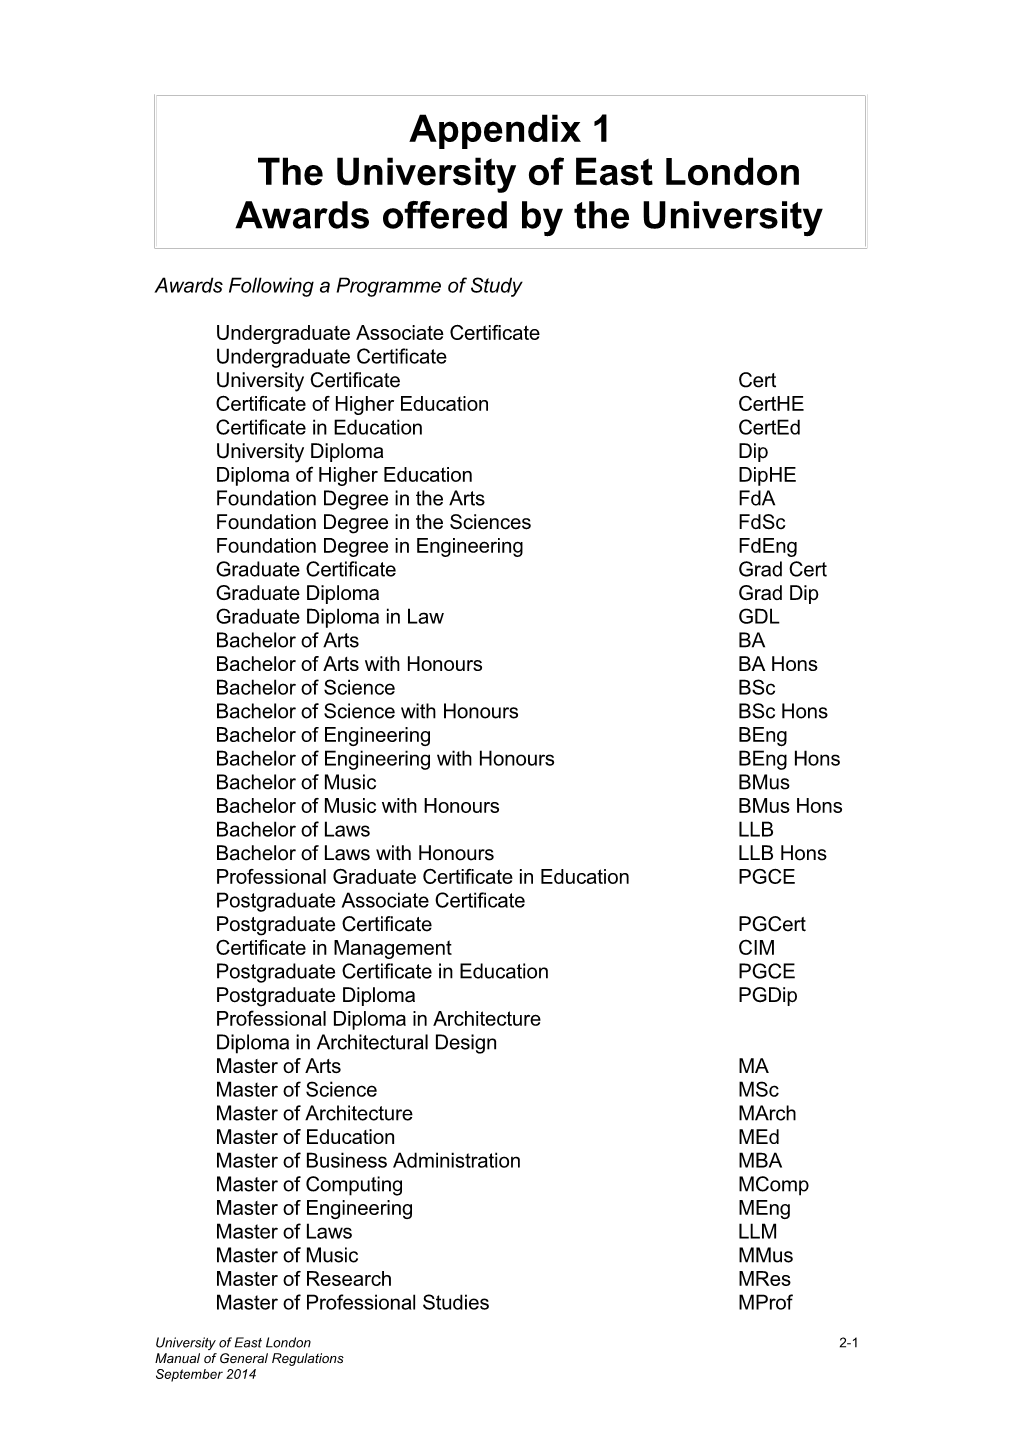 Appendix 1The University of East Londonawards Offered by the University